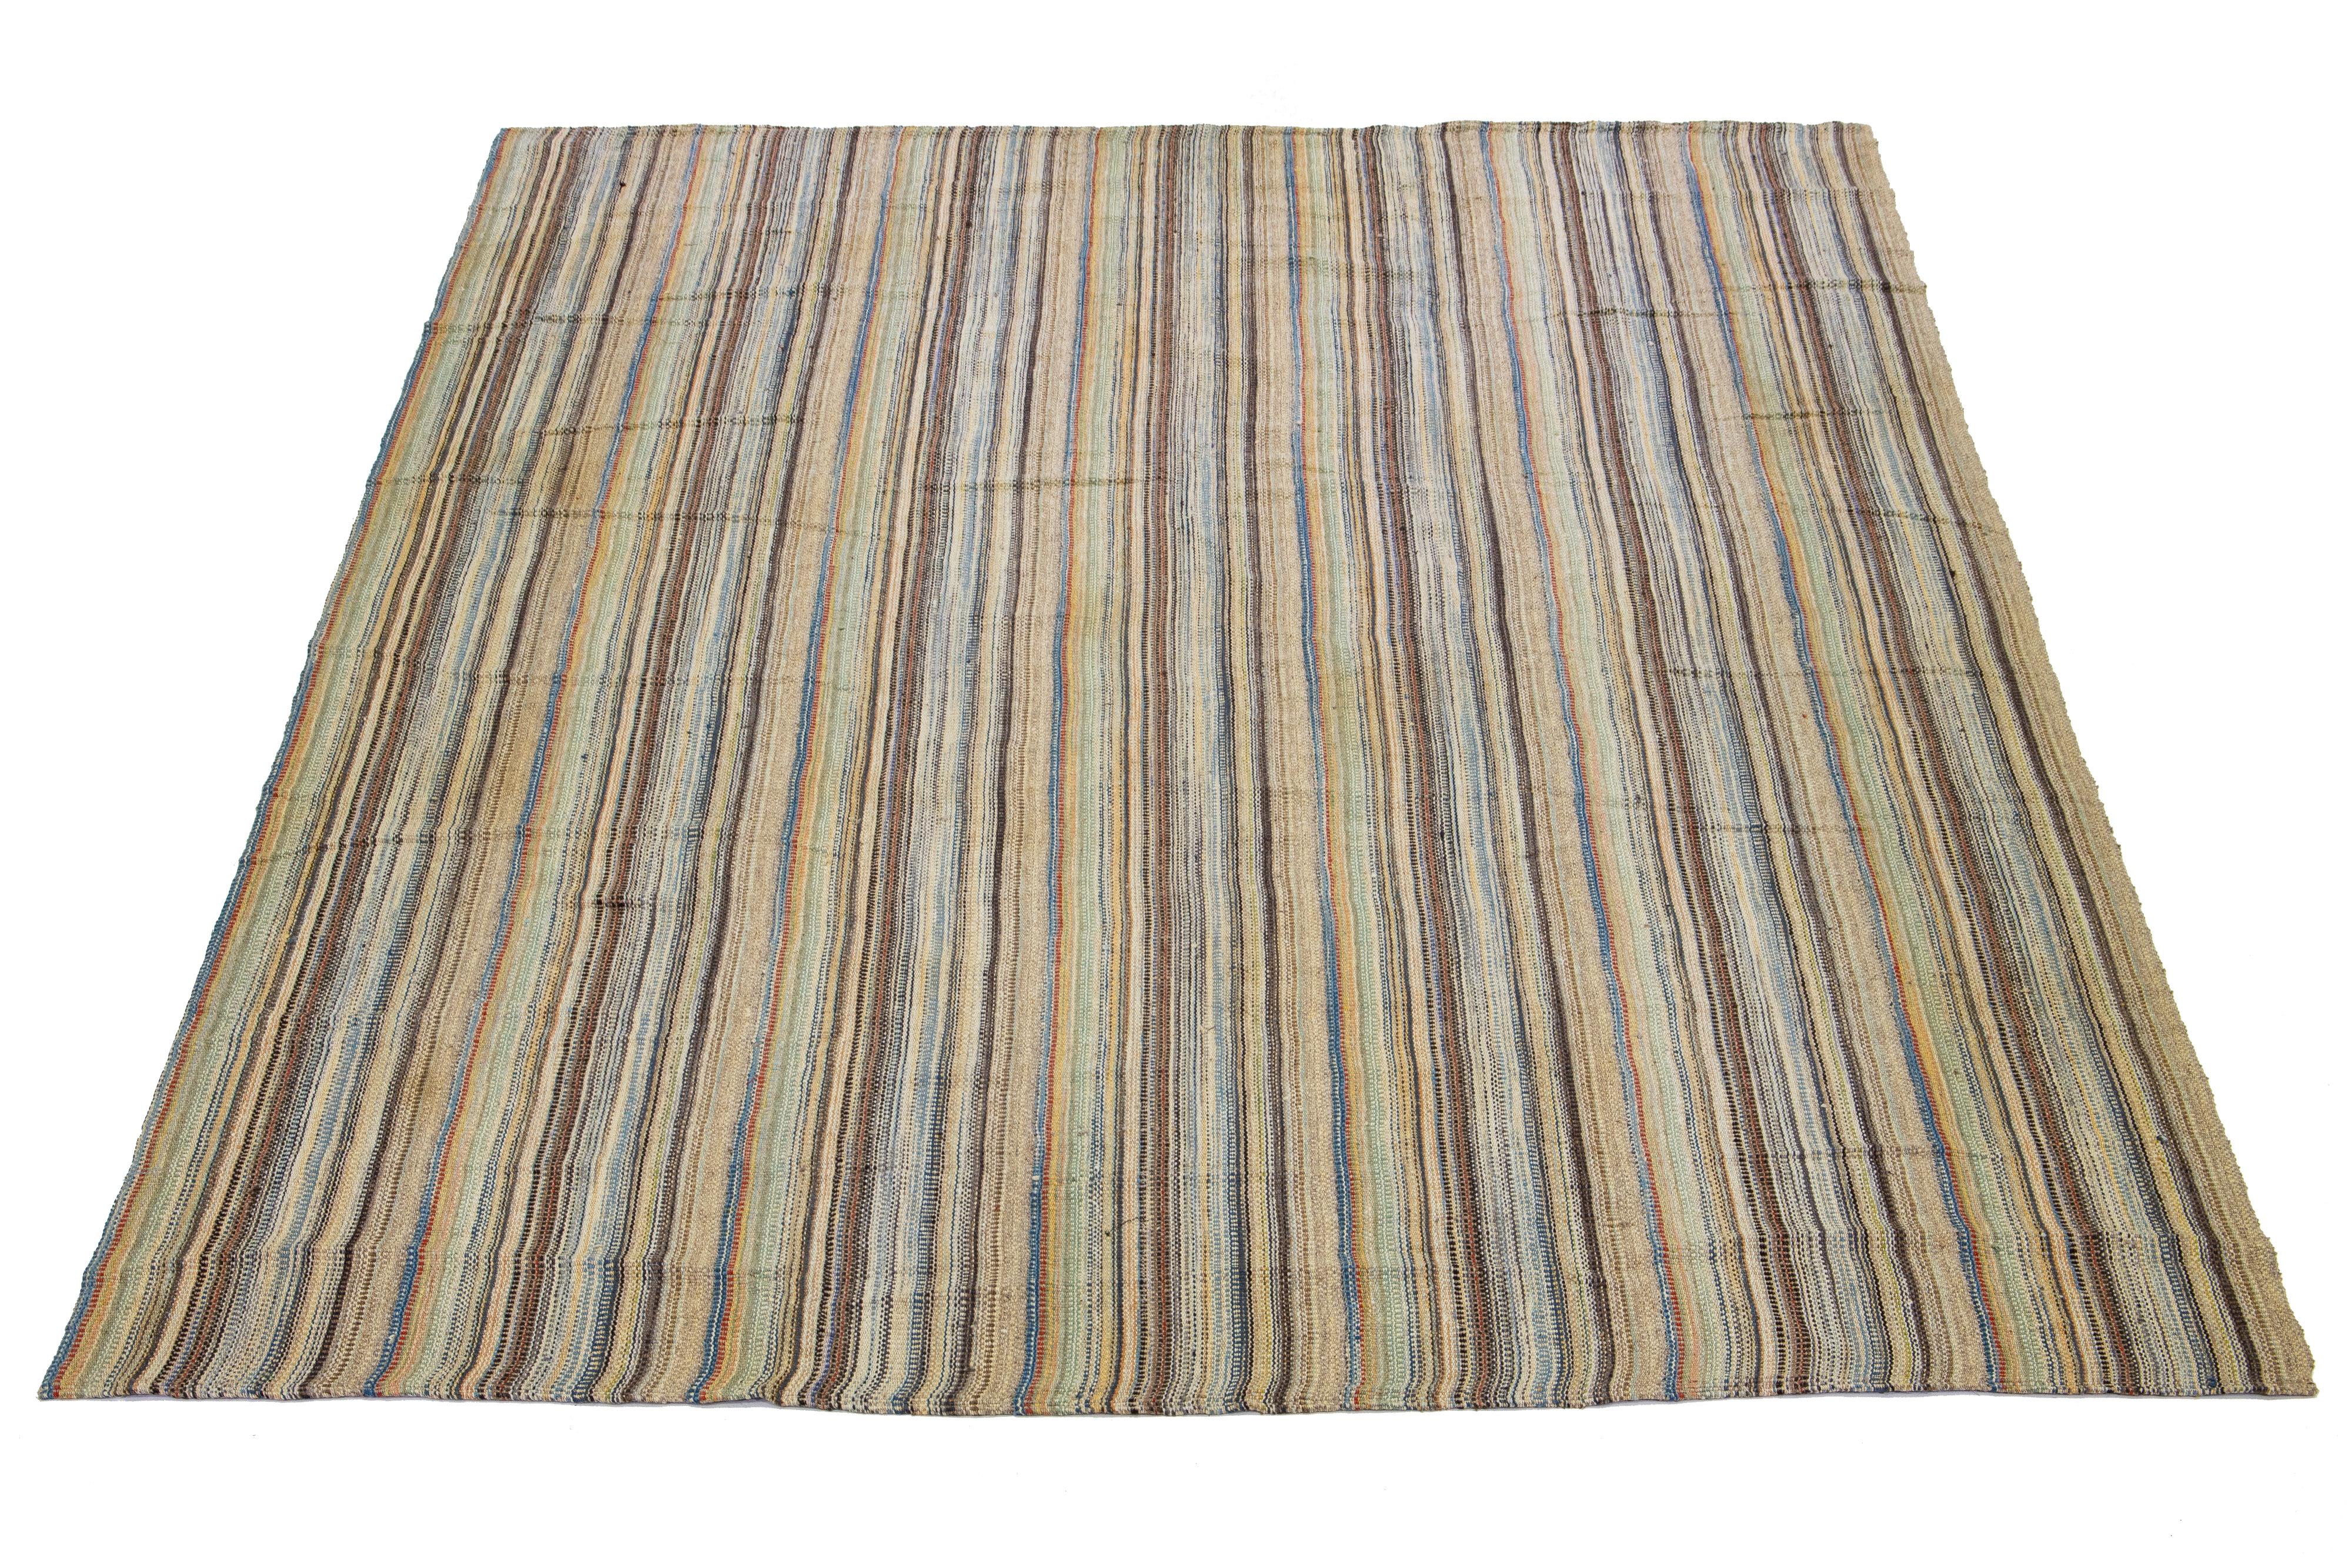 This Indian rug showcases a contemporary Kilim flatweave style crafted from wool. The rug has a beige field with a striped pattern in multicolor shades.

This rug measures 11'6